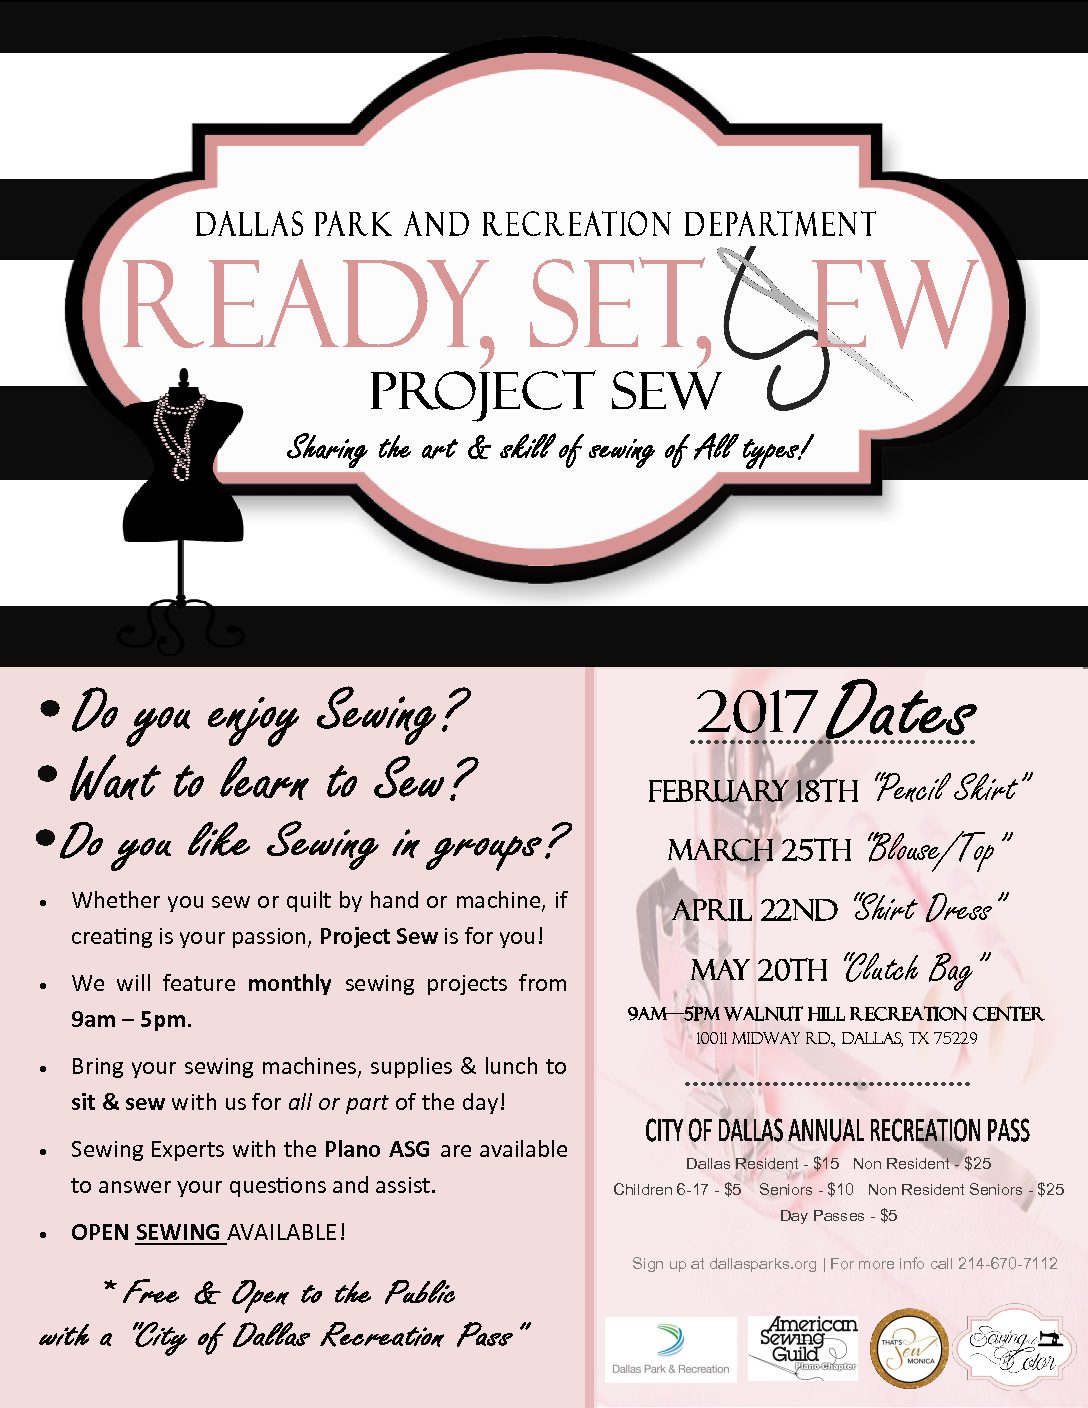 New format and topics for Project SEW !